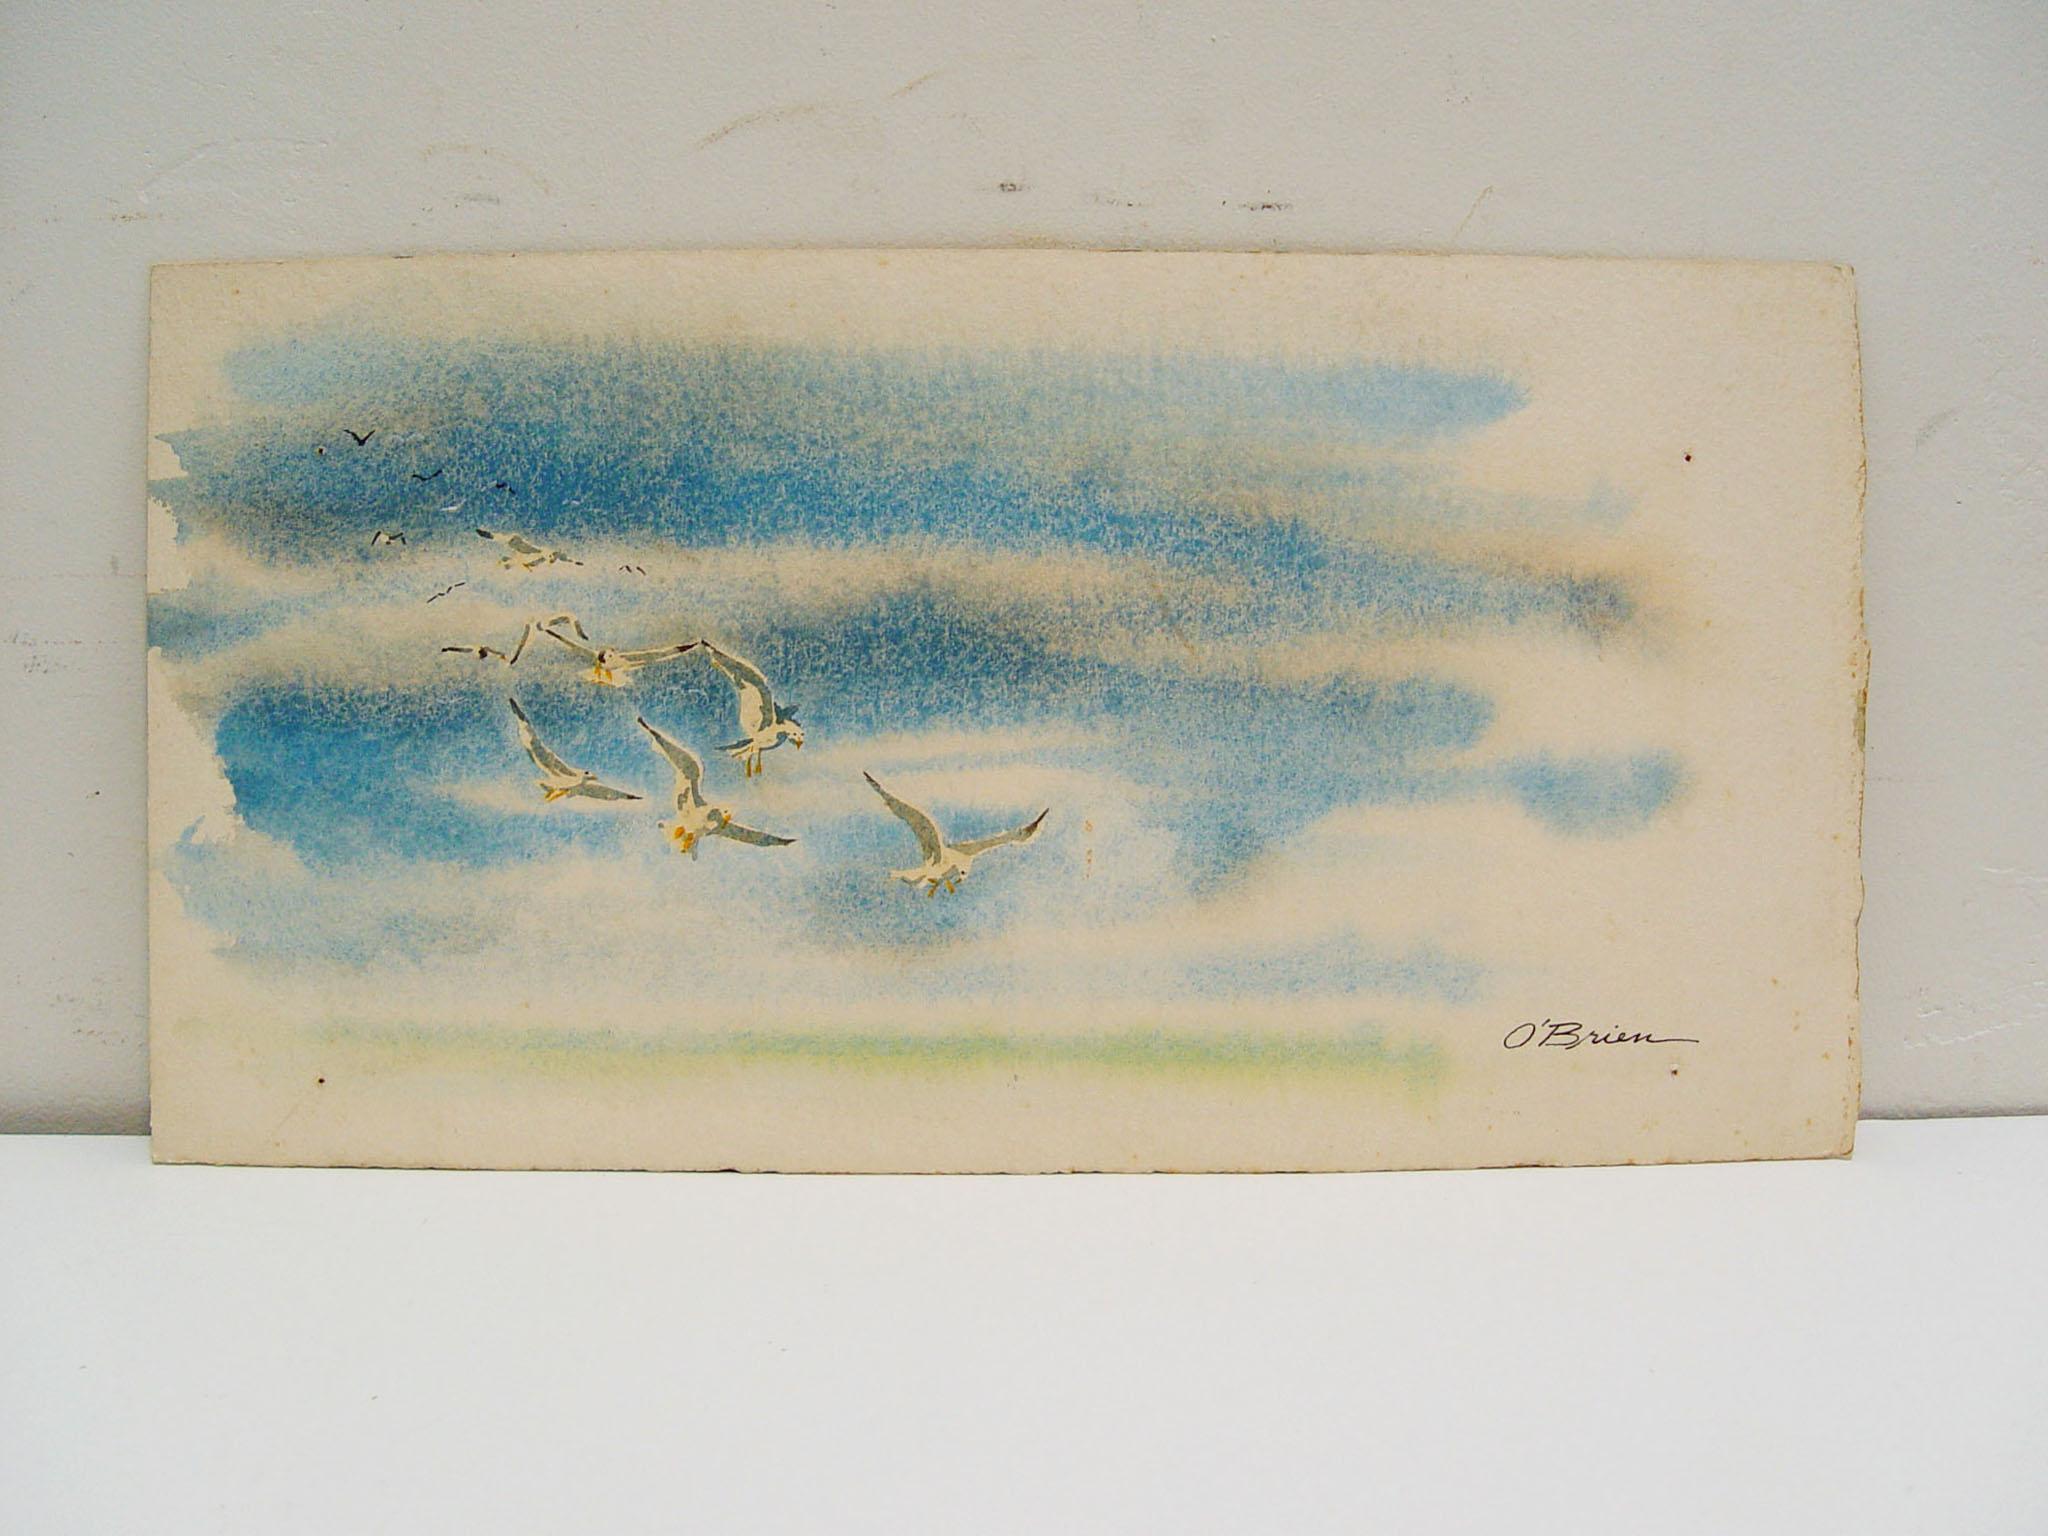 Vintage mid 20th century two-sided reversible watercolor on heavy textured paper, circa 1970. One side is of blue sky with seagulls, signed 